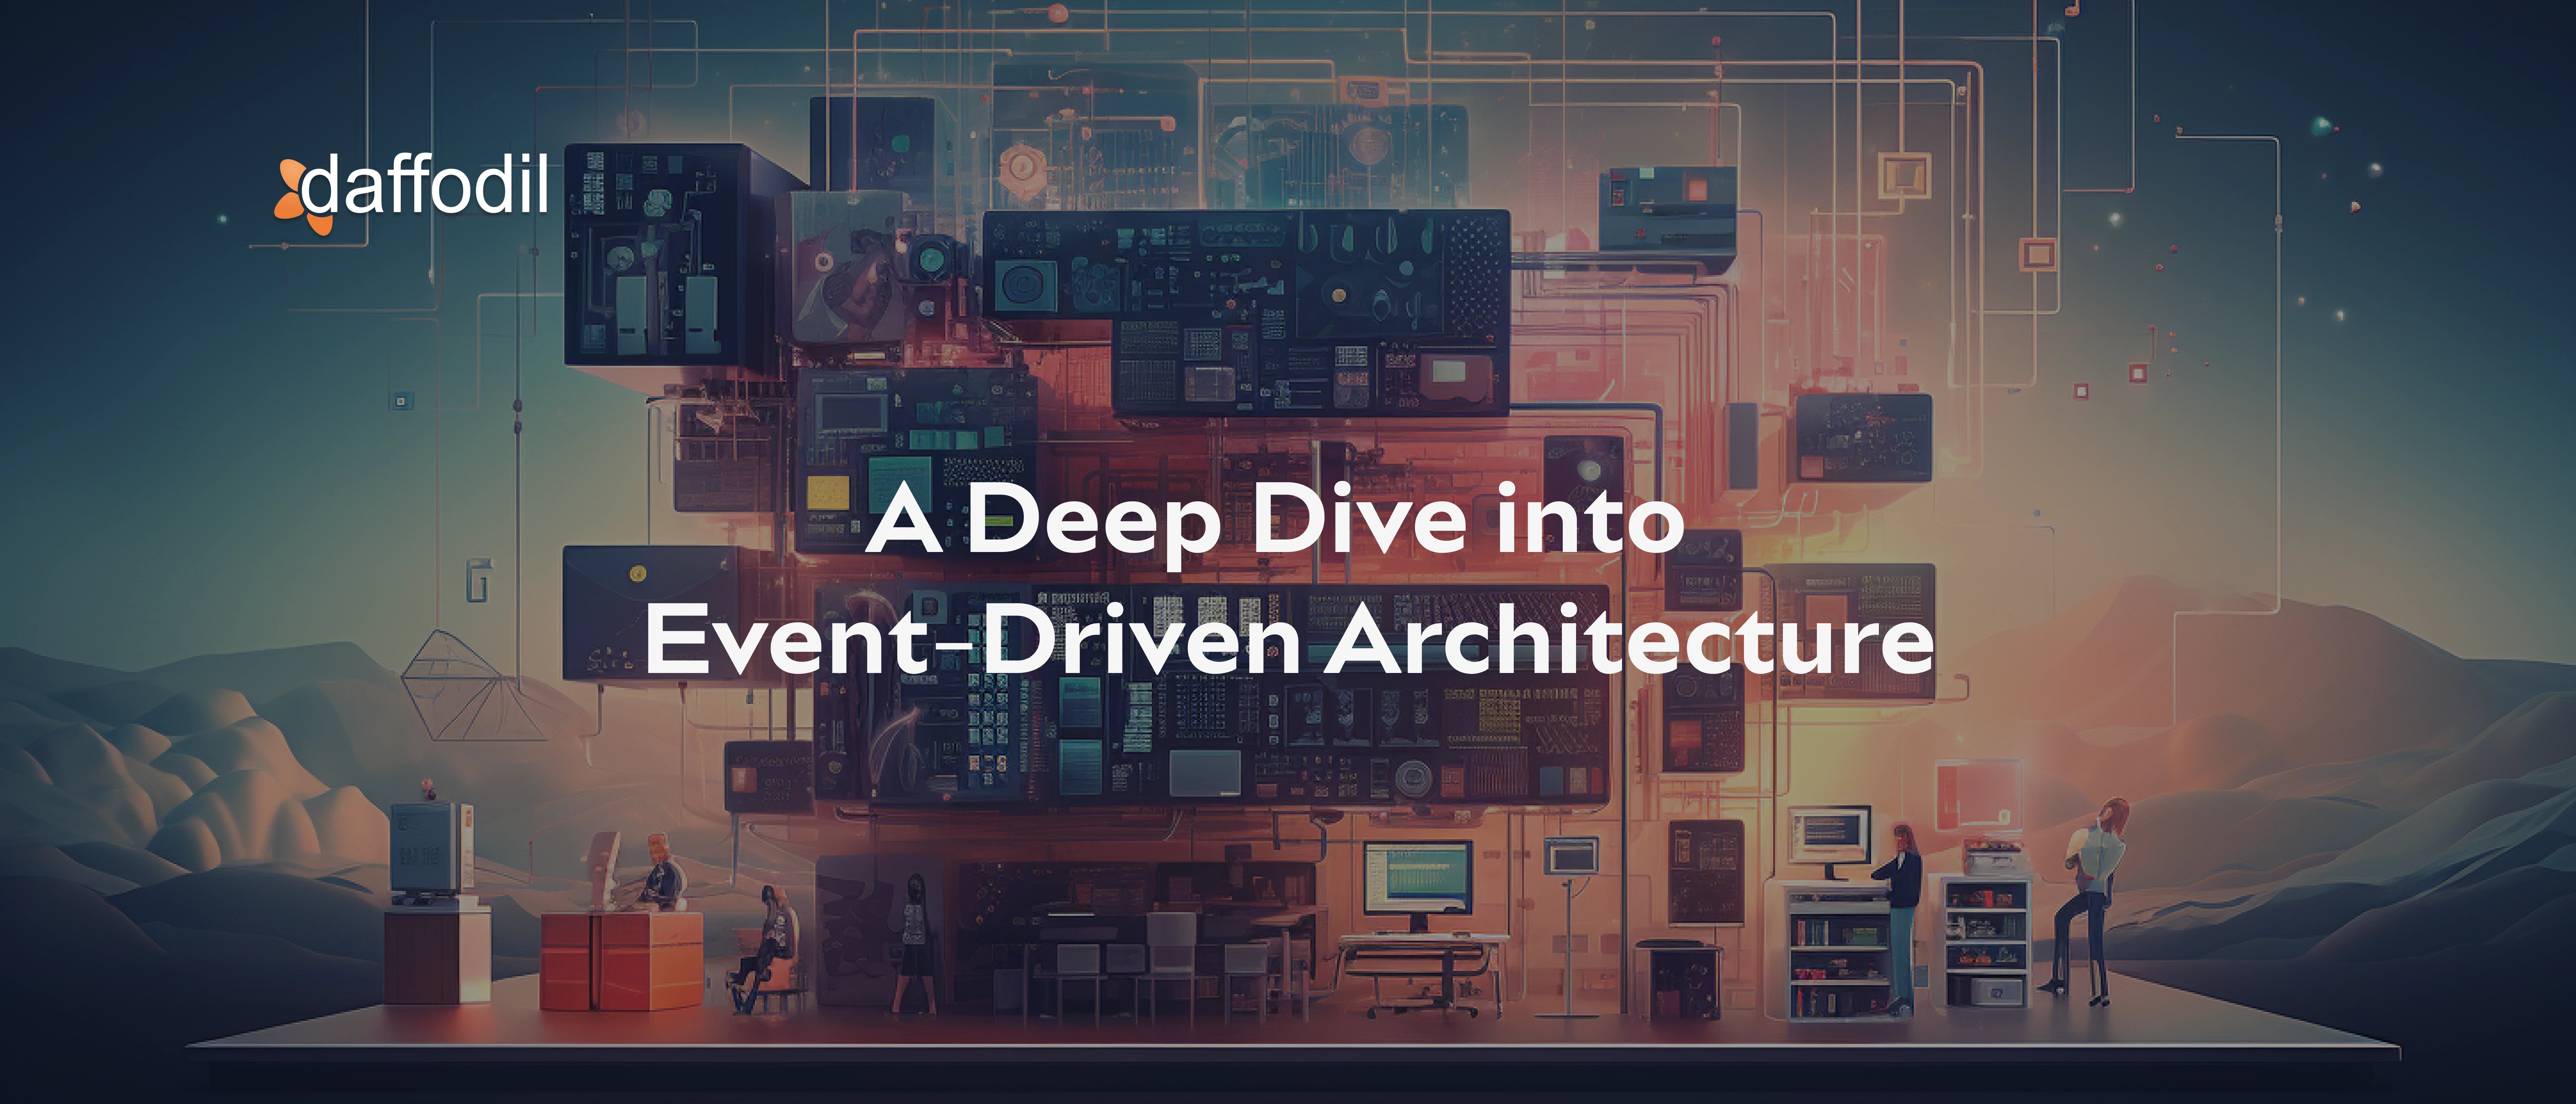 Event-Driven Architecture Explained: Real-World Examples, Models, & Benefits